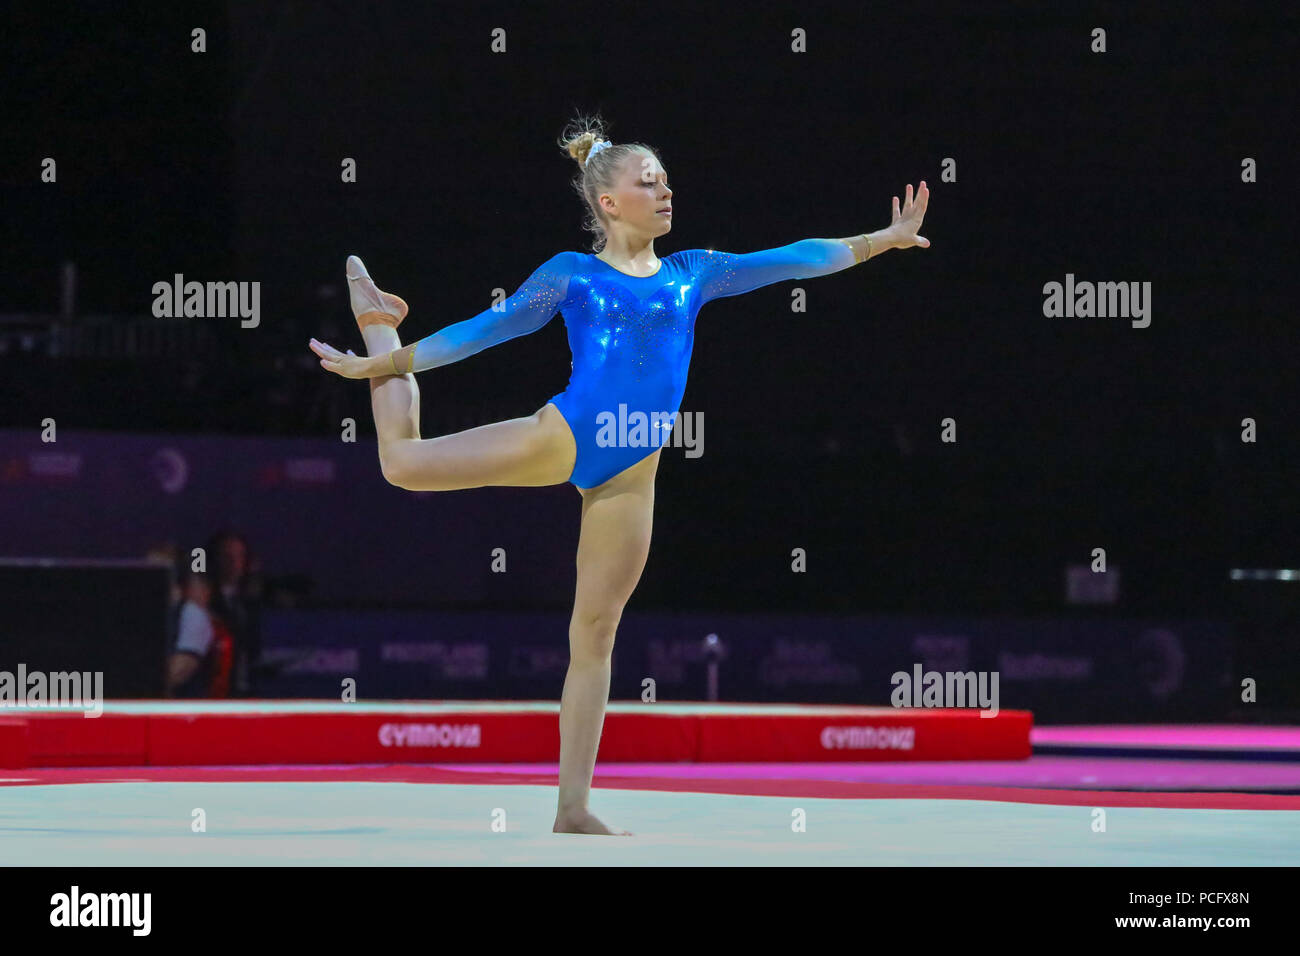 Glasgow, UK. 2nd August 2018. The first gymnastic competitions of the European championships took place at the Glasgow Hydro arena, Scottish exhibition centre with entrants from Denmark, Luxemburg,Sweden, Cyprus, Bulgaria, Ireland, Georgia, Lithuania, Slovenia and the Czech Republic. Credit: Findlay/Alamy Live News Stock Photo